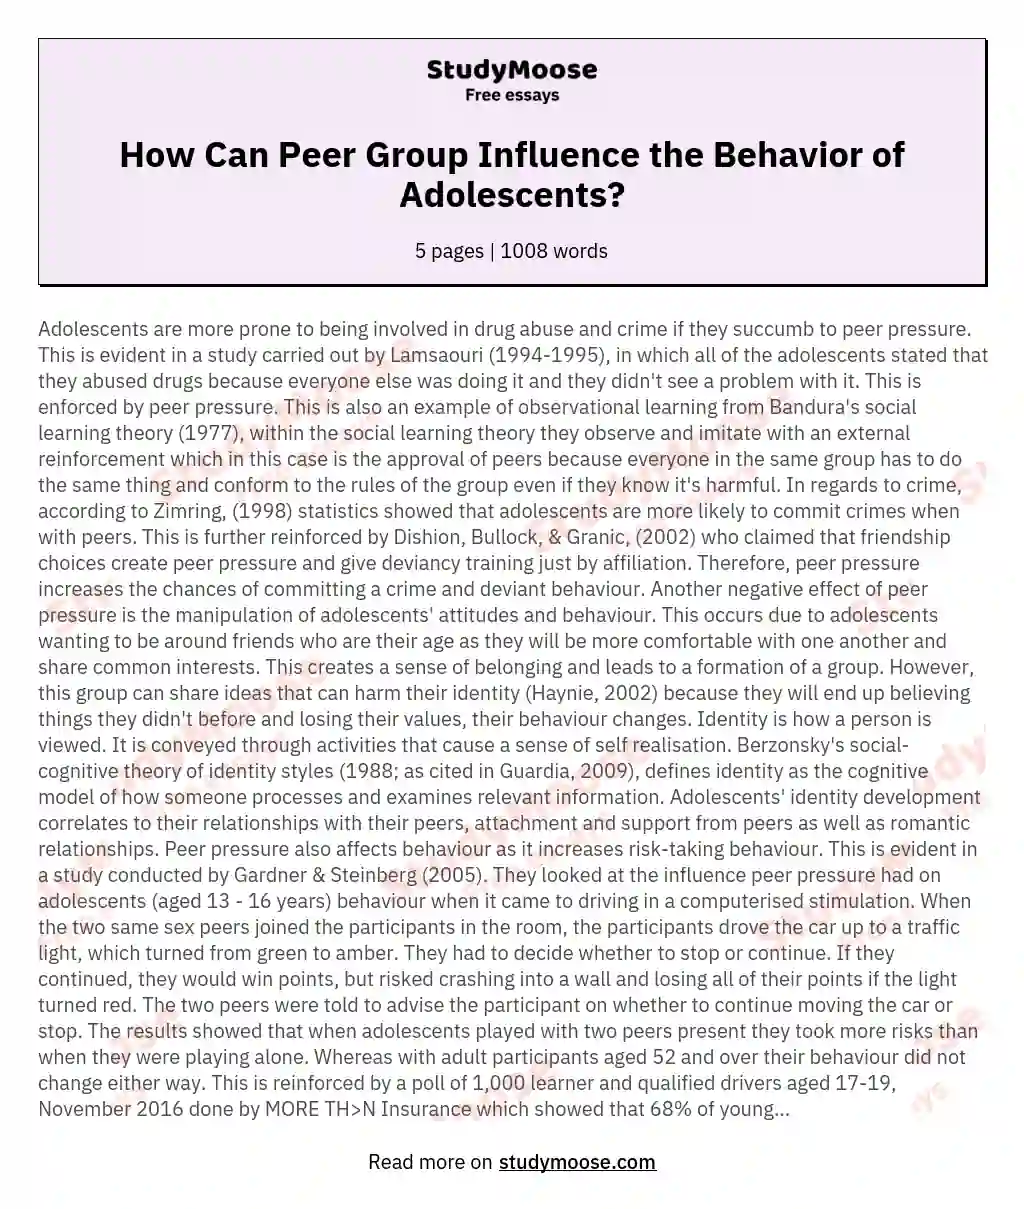 How Can Peer Group Influence the Behavior of Adolescents? essay